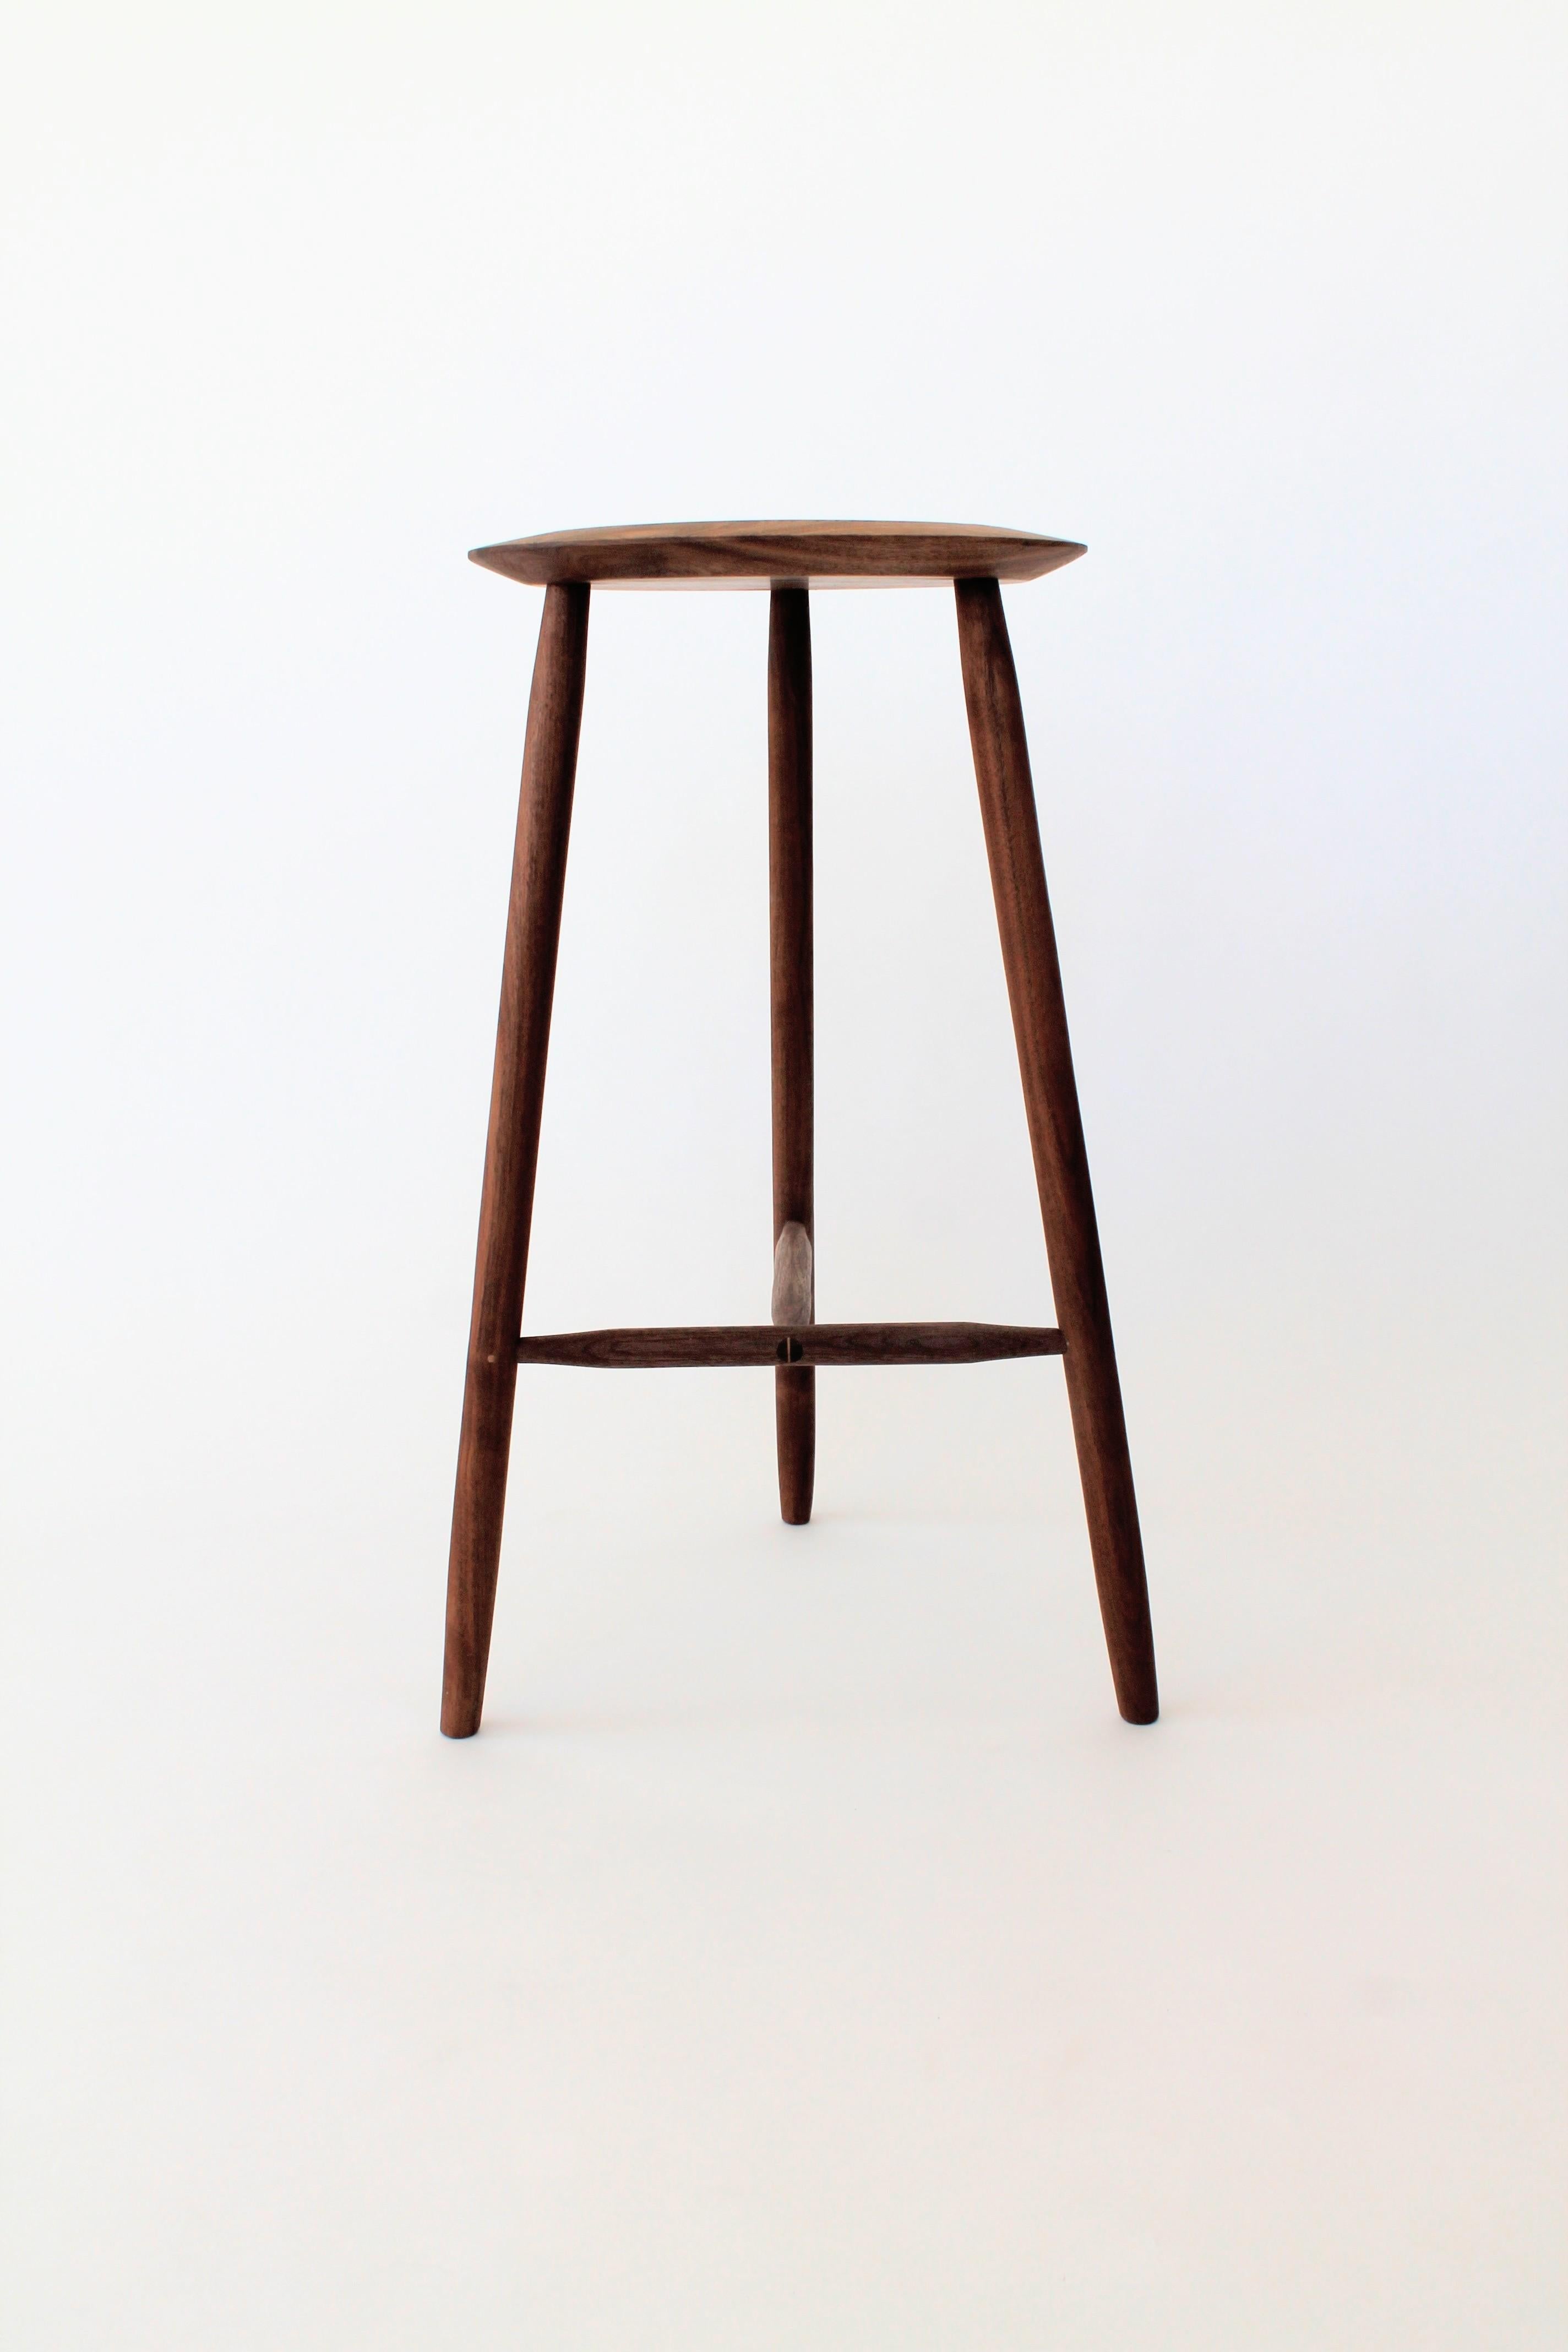 Light and strong, the beachcomber bar stool evokes the sight of an old wooden monohull, it's lean, sturdy mast together with the rigging worthy of the high seas. Constructed of hand shaped legs and stretchers, each piece is carefully fit and pinned